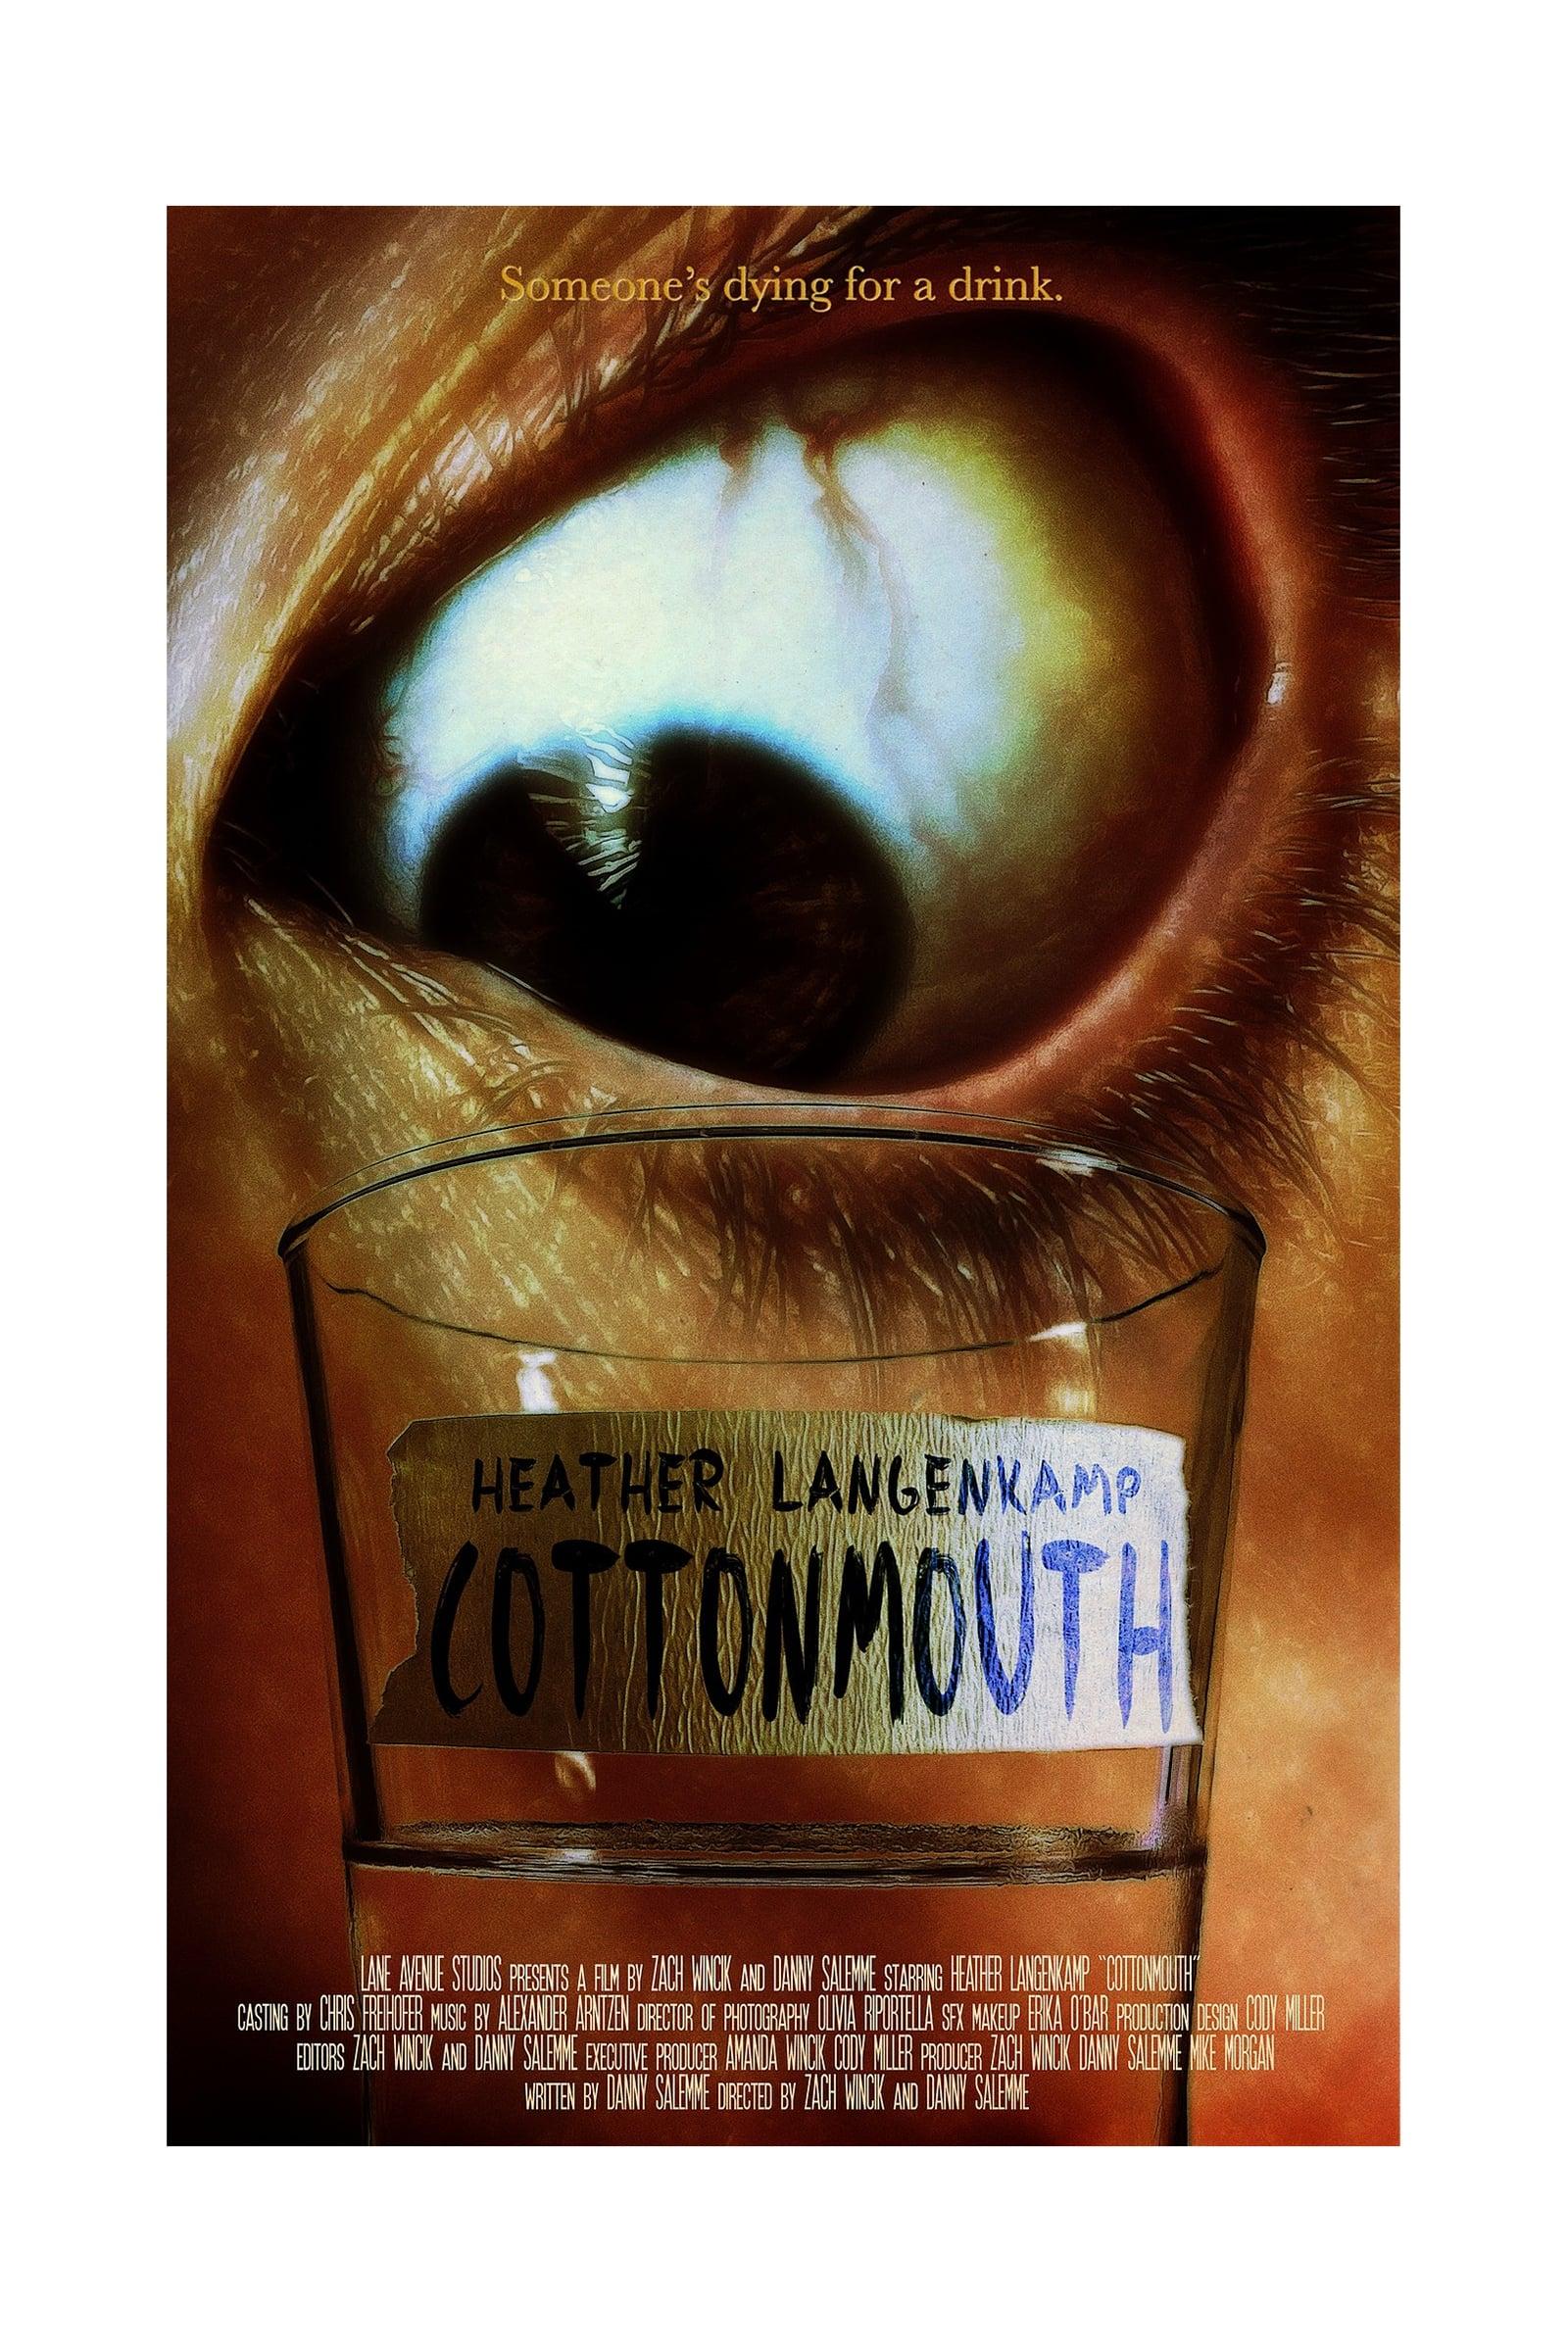 Cottonmouth poster